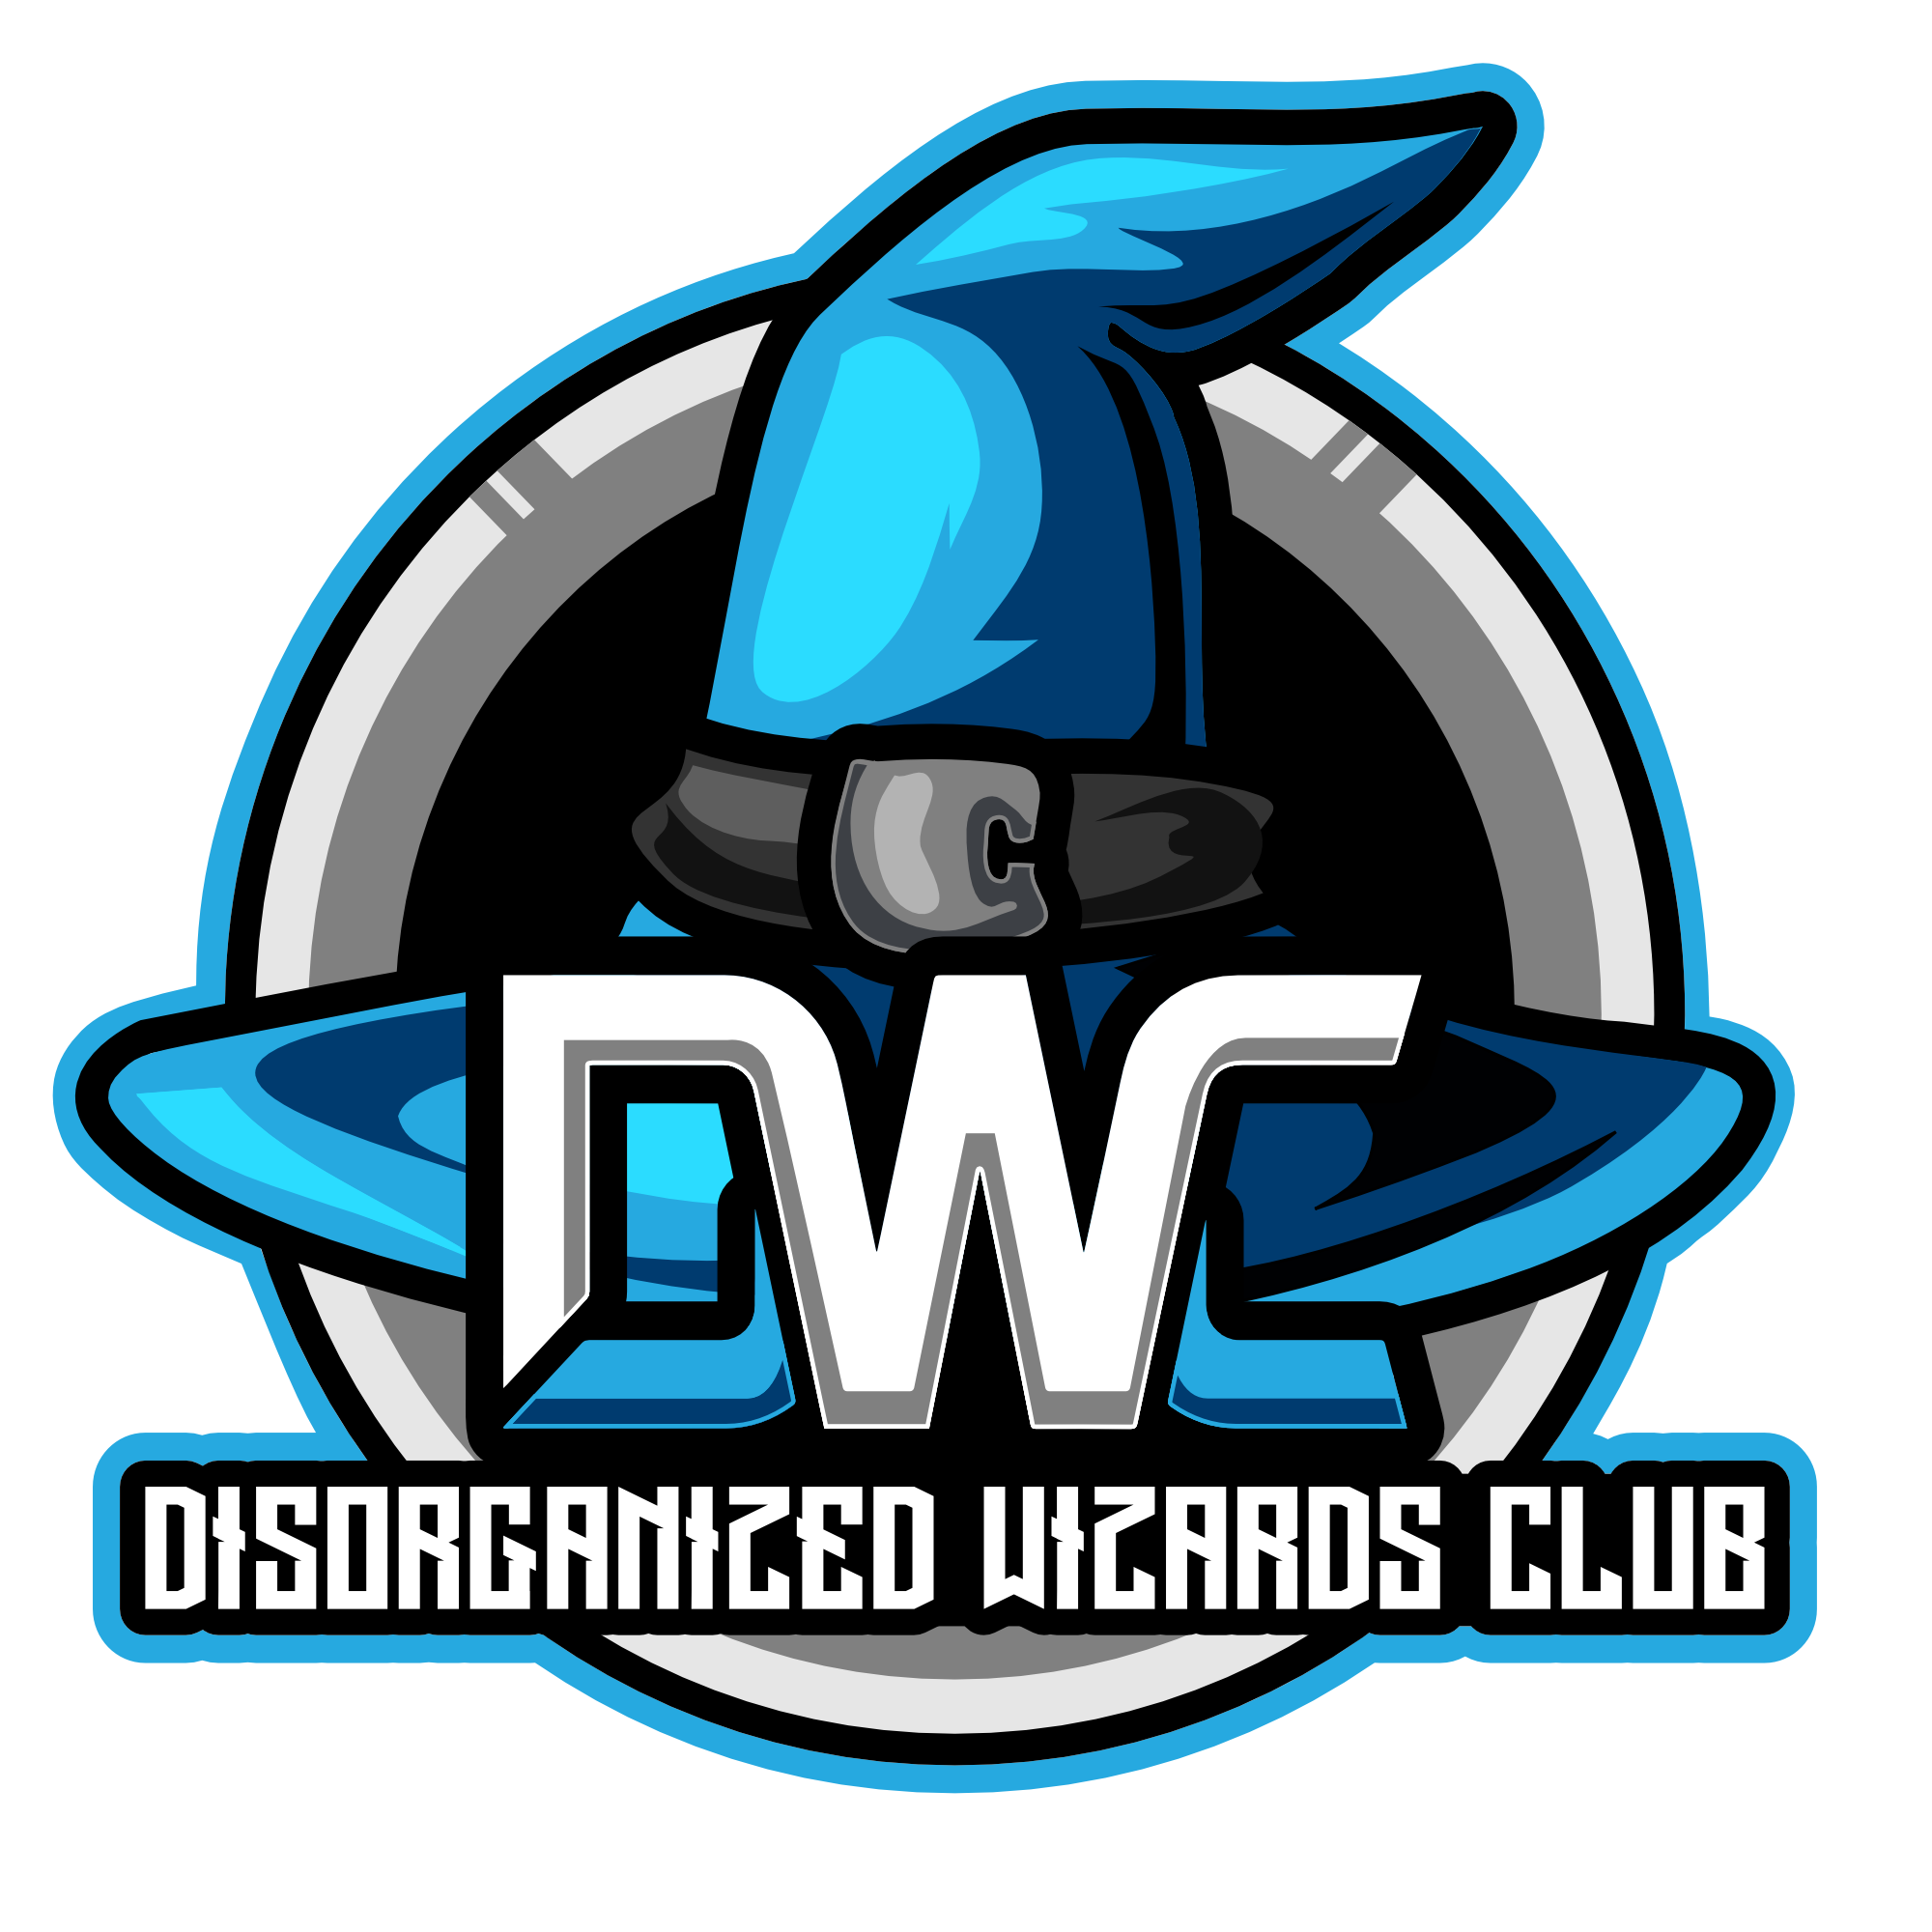 Our Top 10 Cards from D&D Adventures in the Forgotten Realms: Disorganized Wizards Club Ep.235